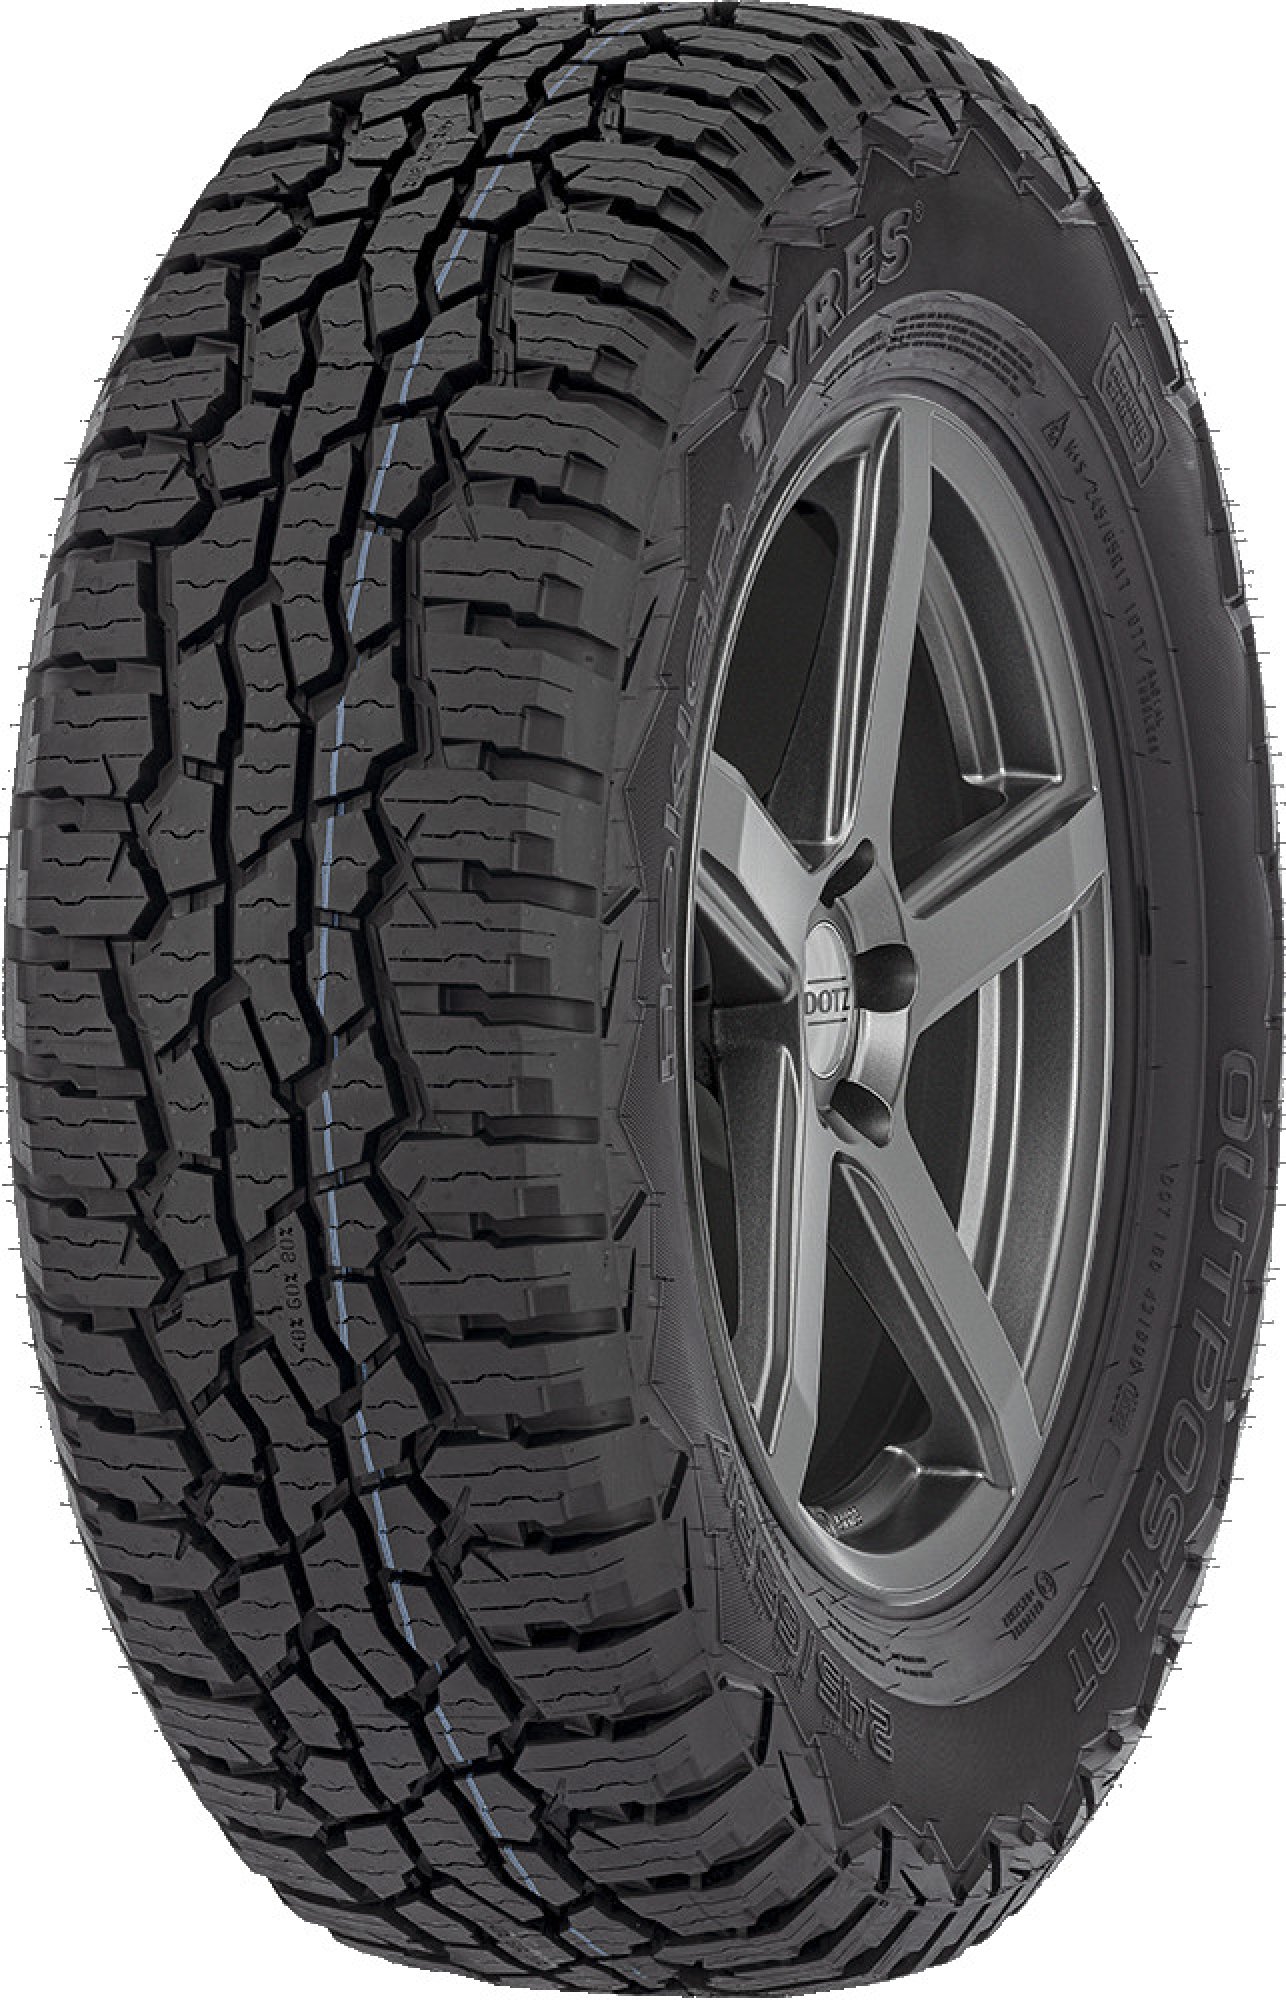 NOKIAN TYRES OUTPOST AT 265/60 R 20 121/118S